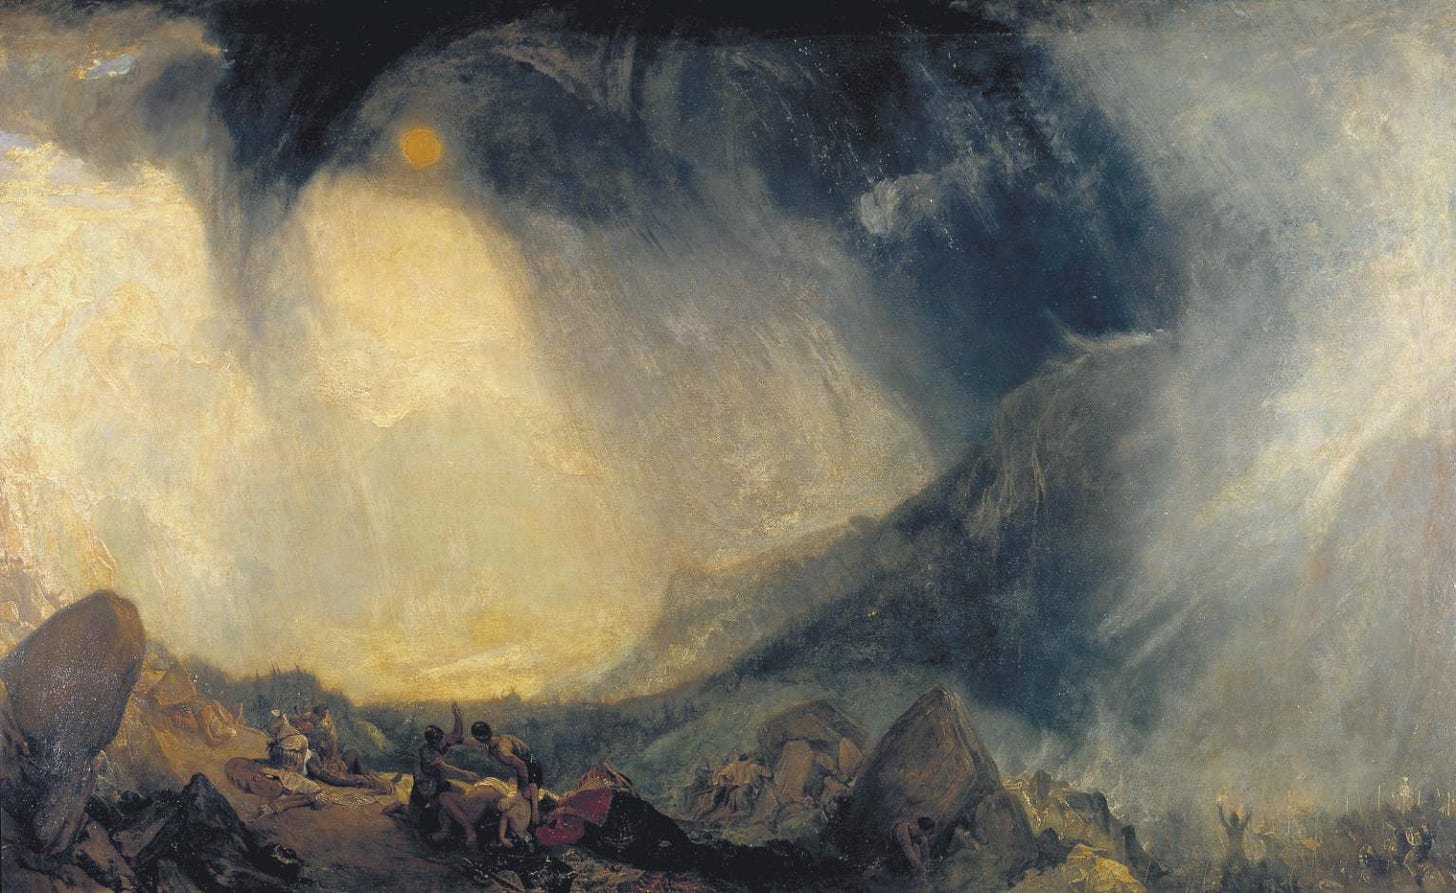 Snow Storm: Hannibal Crossing the Alps by Joseph Mallord William Turner, 1812